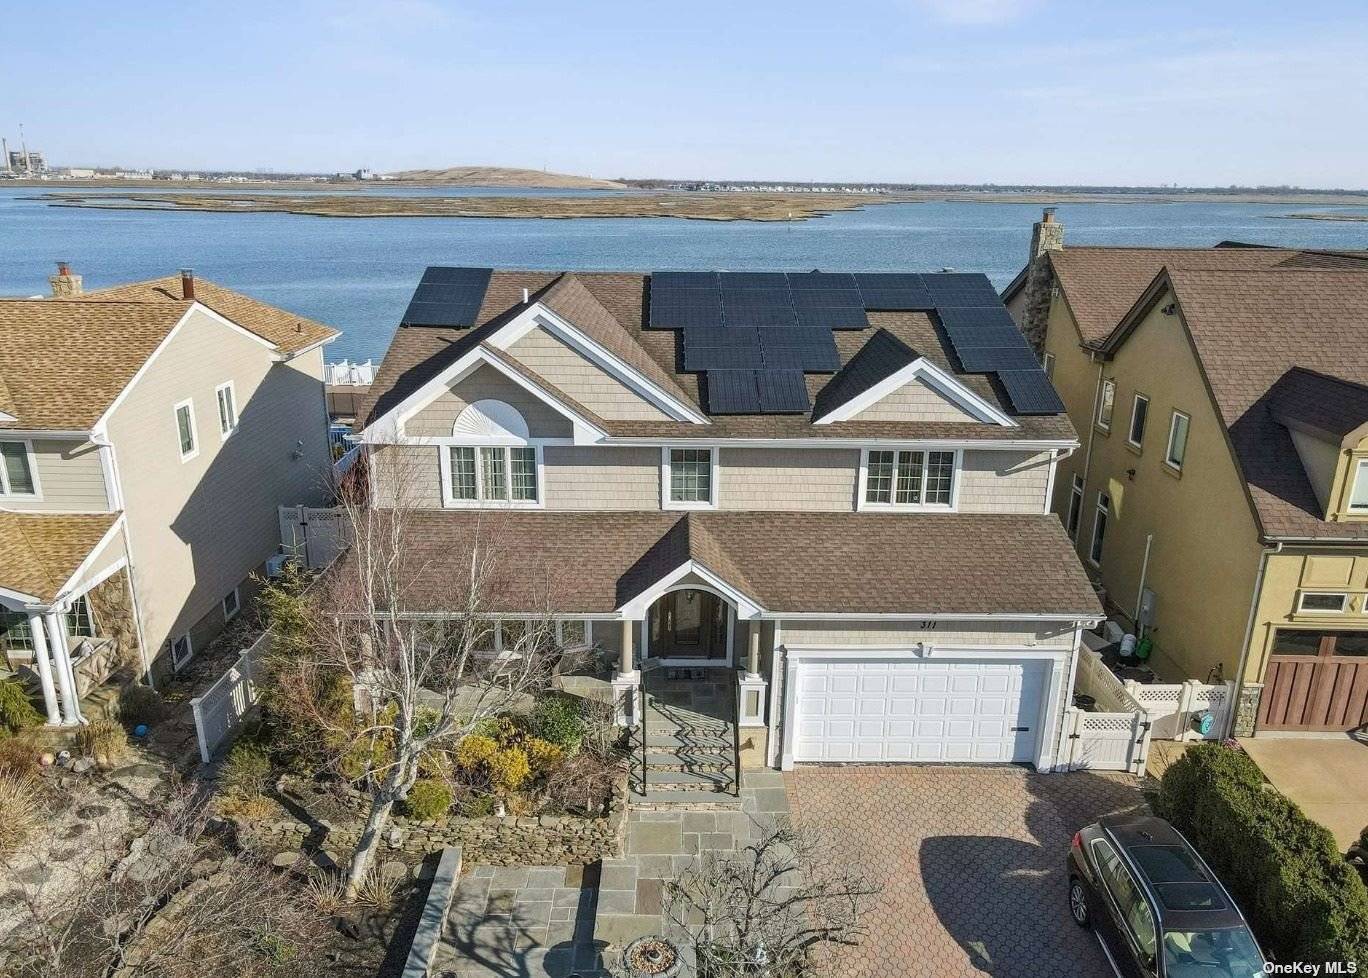 Beautiful Bayfront Home Offered For YEARLY Rental Bay Front Living Truly At It's Finest in Lido West !